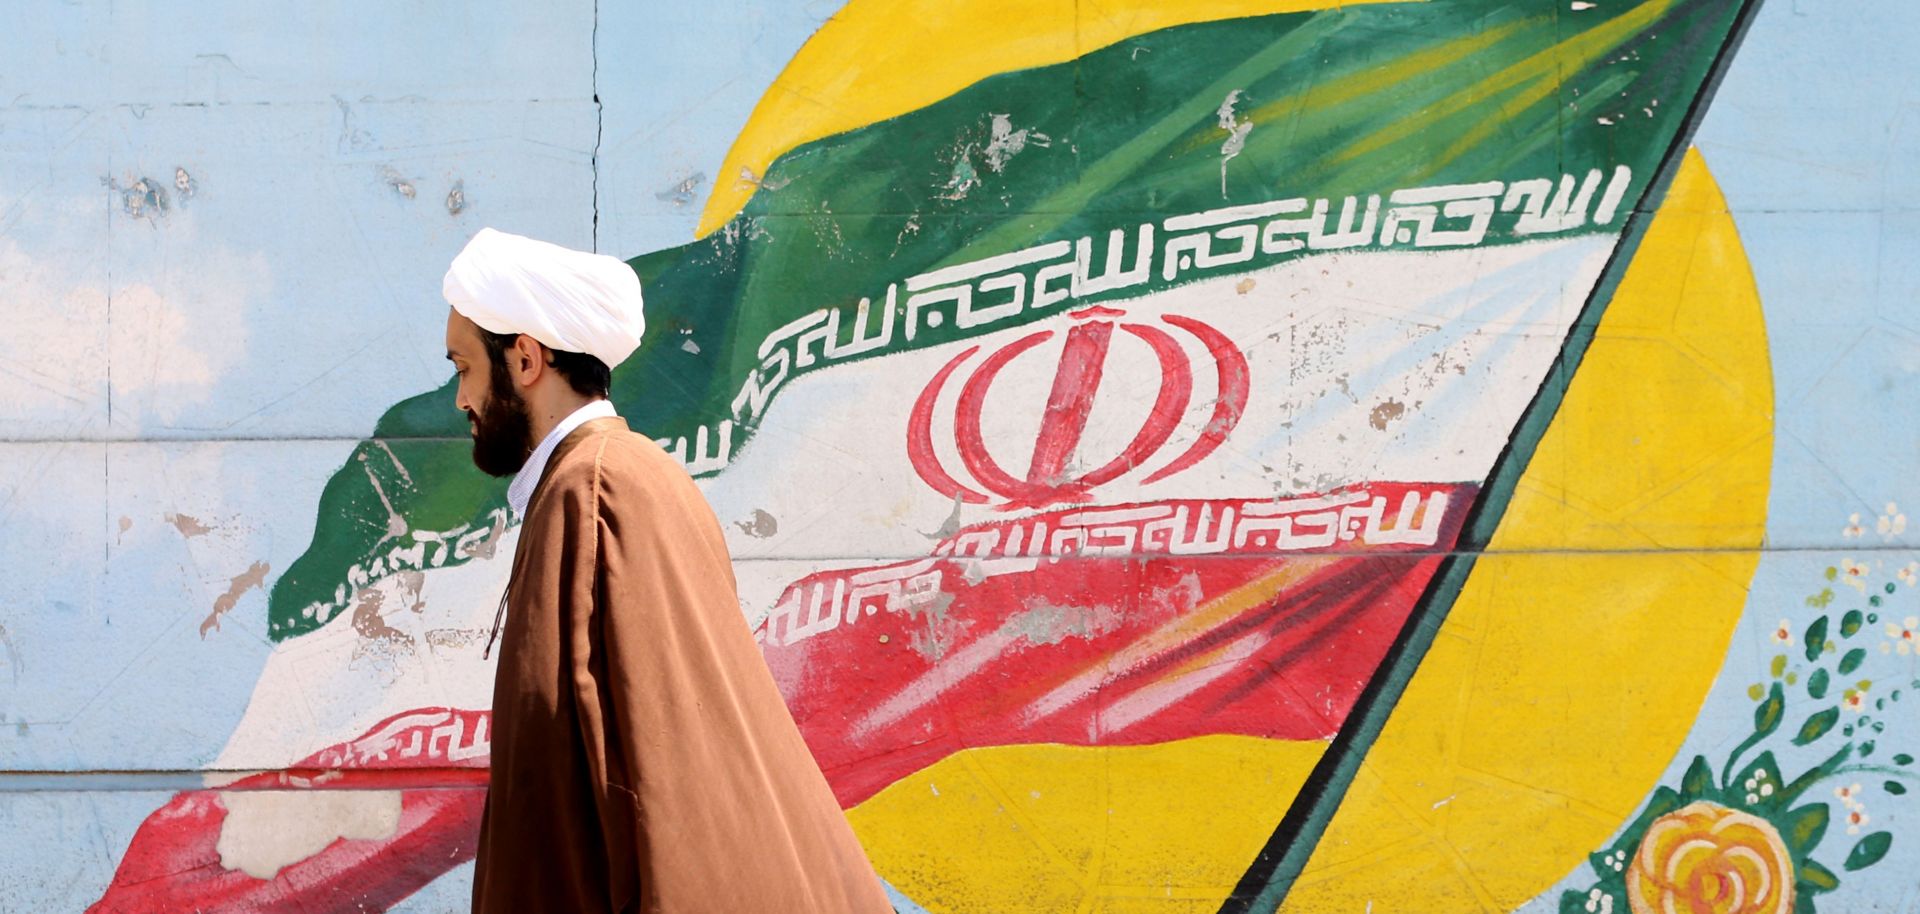 An Iranian cleric walks past a mural painting of the Iranian flag in Tehran on Aug. 27, 2019.